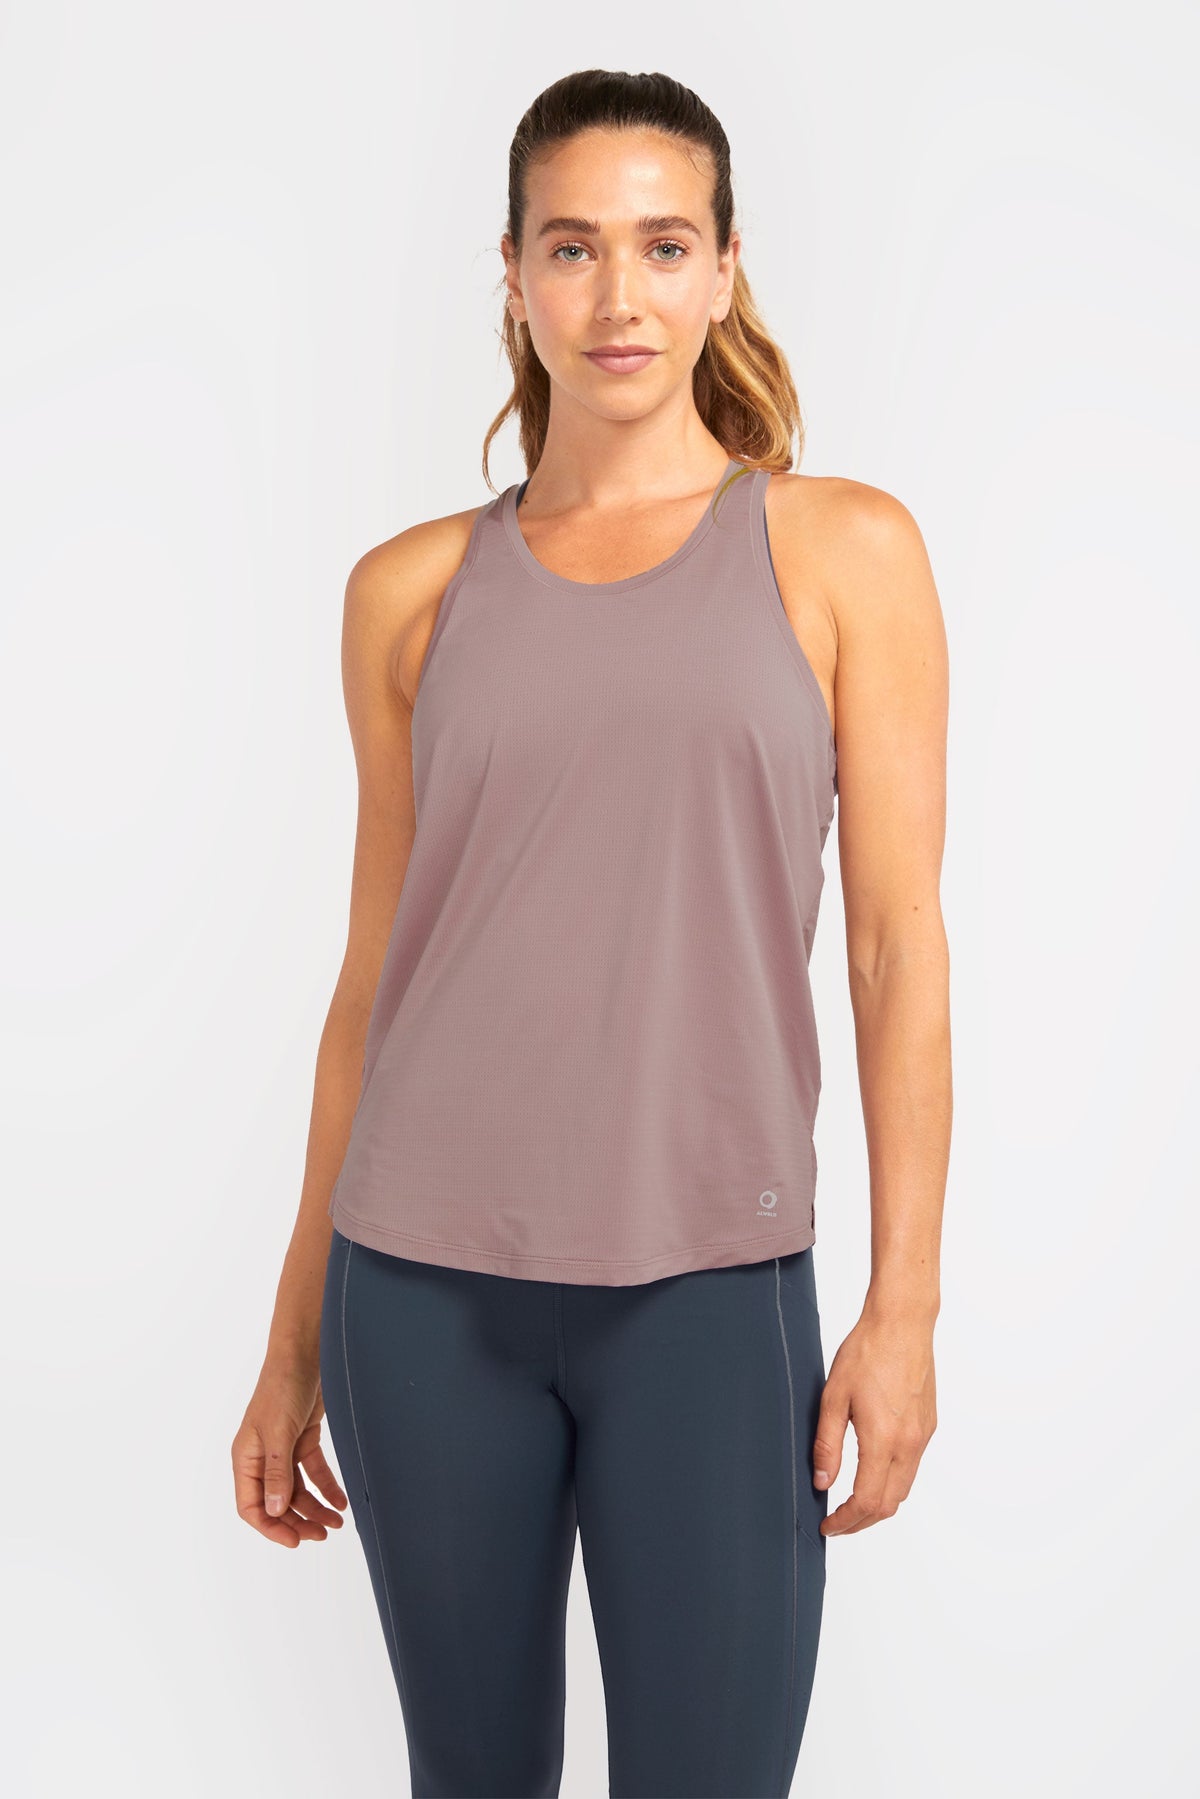 Front view mesh lululemon dupe workout tank top in color elderberry (pale mauve taupe)